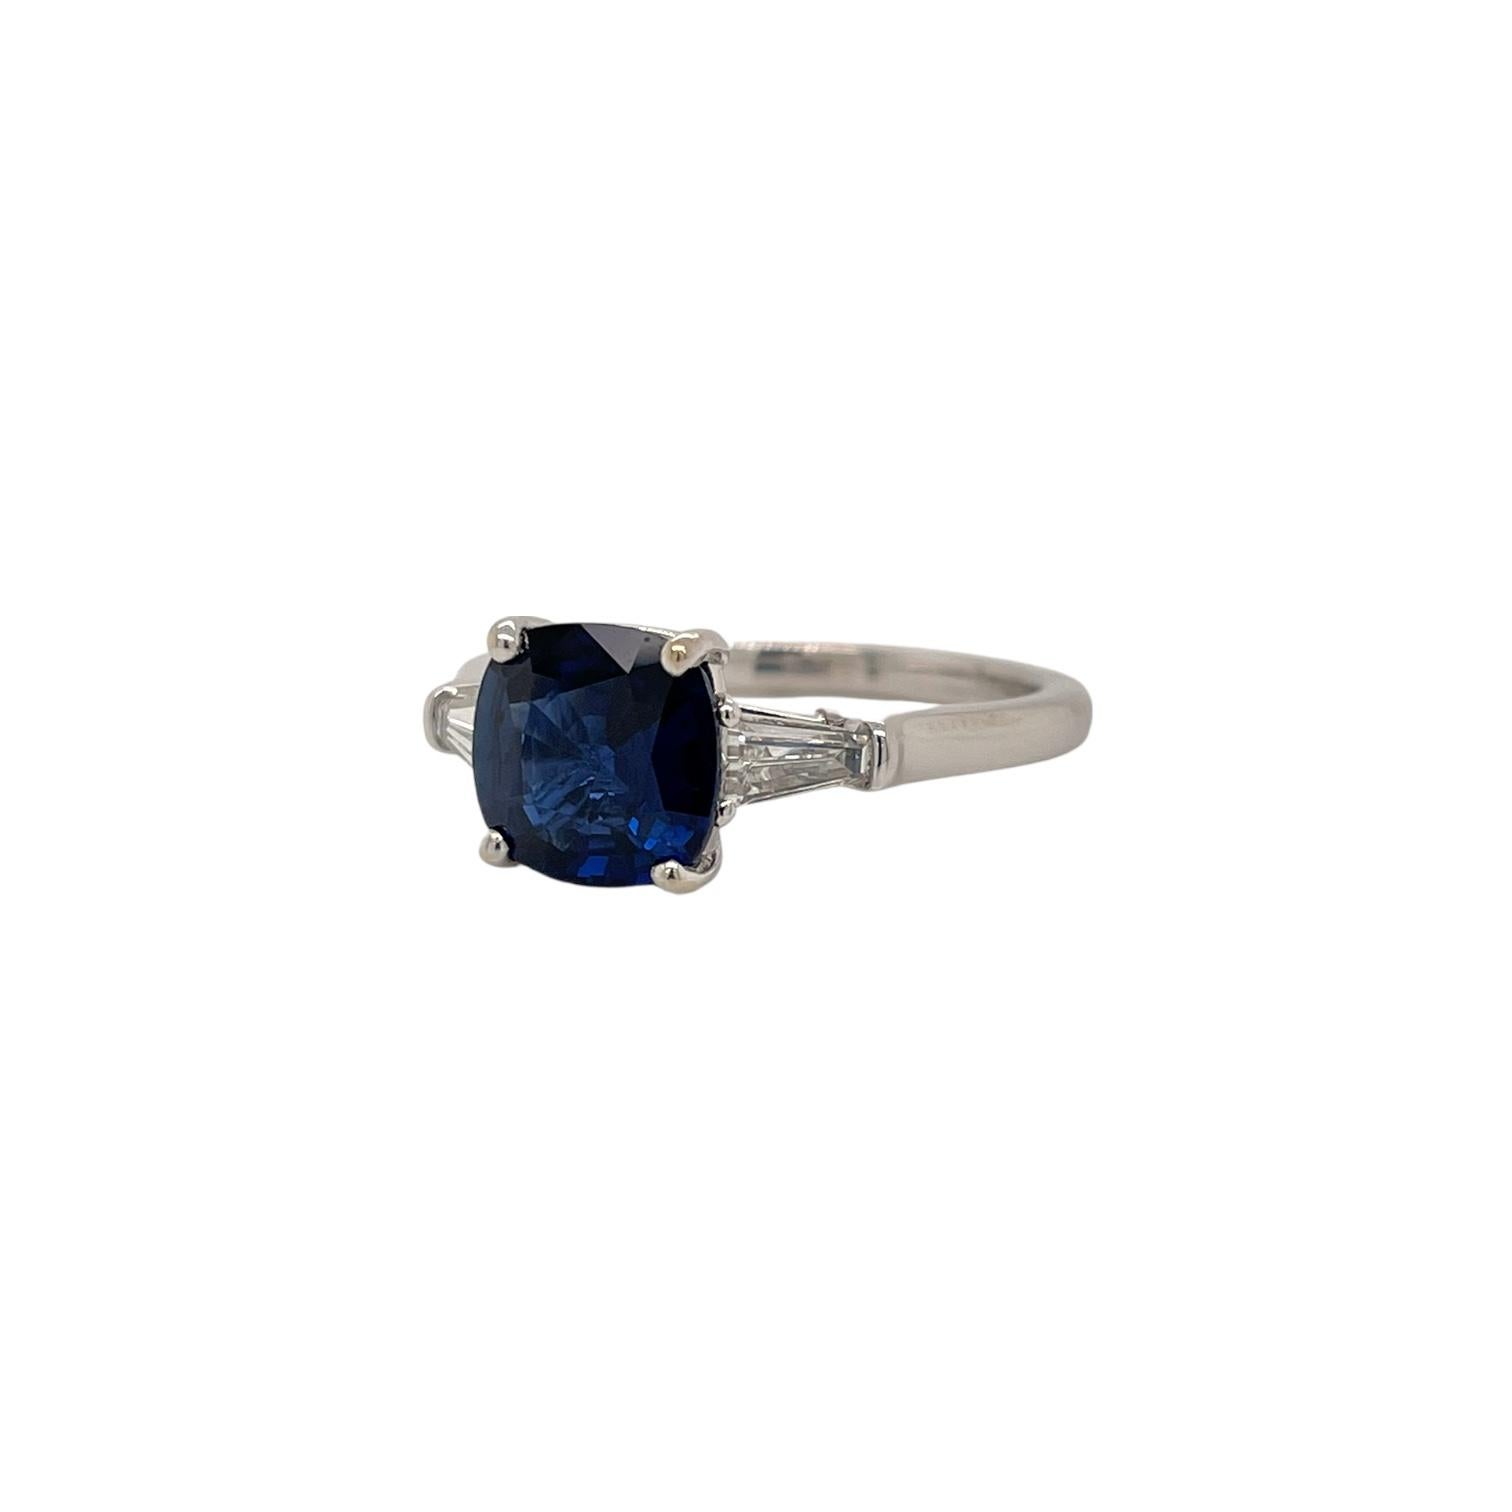 This beautiful royal blue cushion sapphire and baguette diamond ring is set in 18K white gold and includes a certification from Bellerophon. This ring is sure to please you with the beautiful sparkle of the sapphire and baguette diamonds. The center